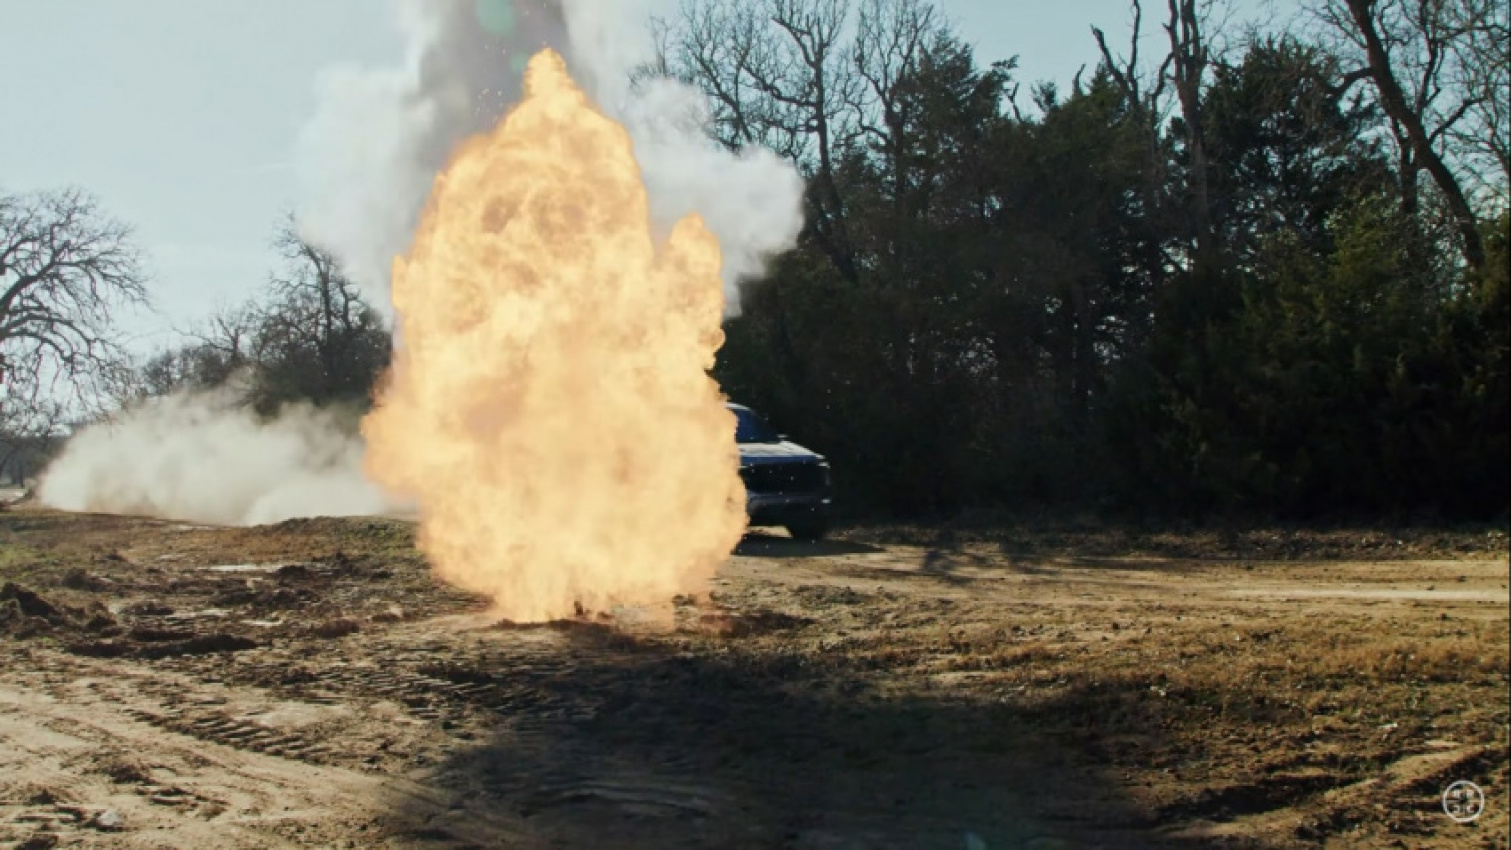 autos, cars, truck, vehicle-genres, roush f-150 + coffee + explosions + bucky lasek = whatever this video is